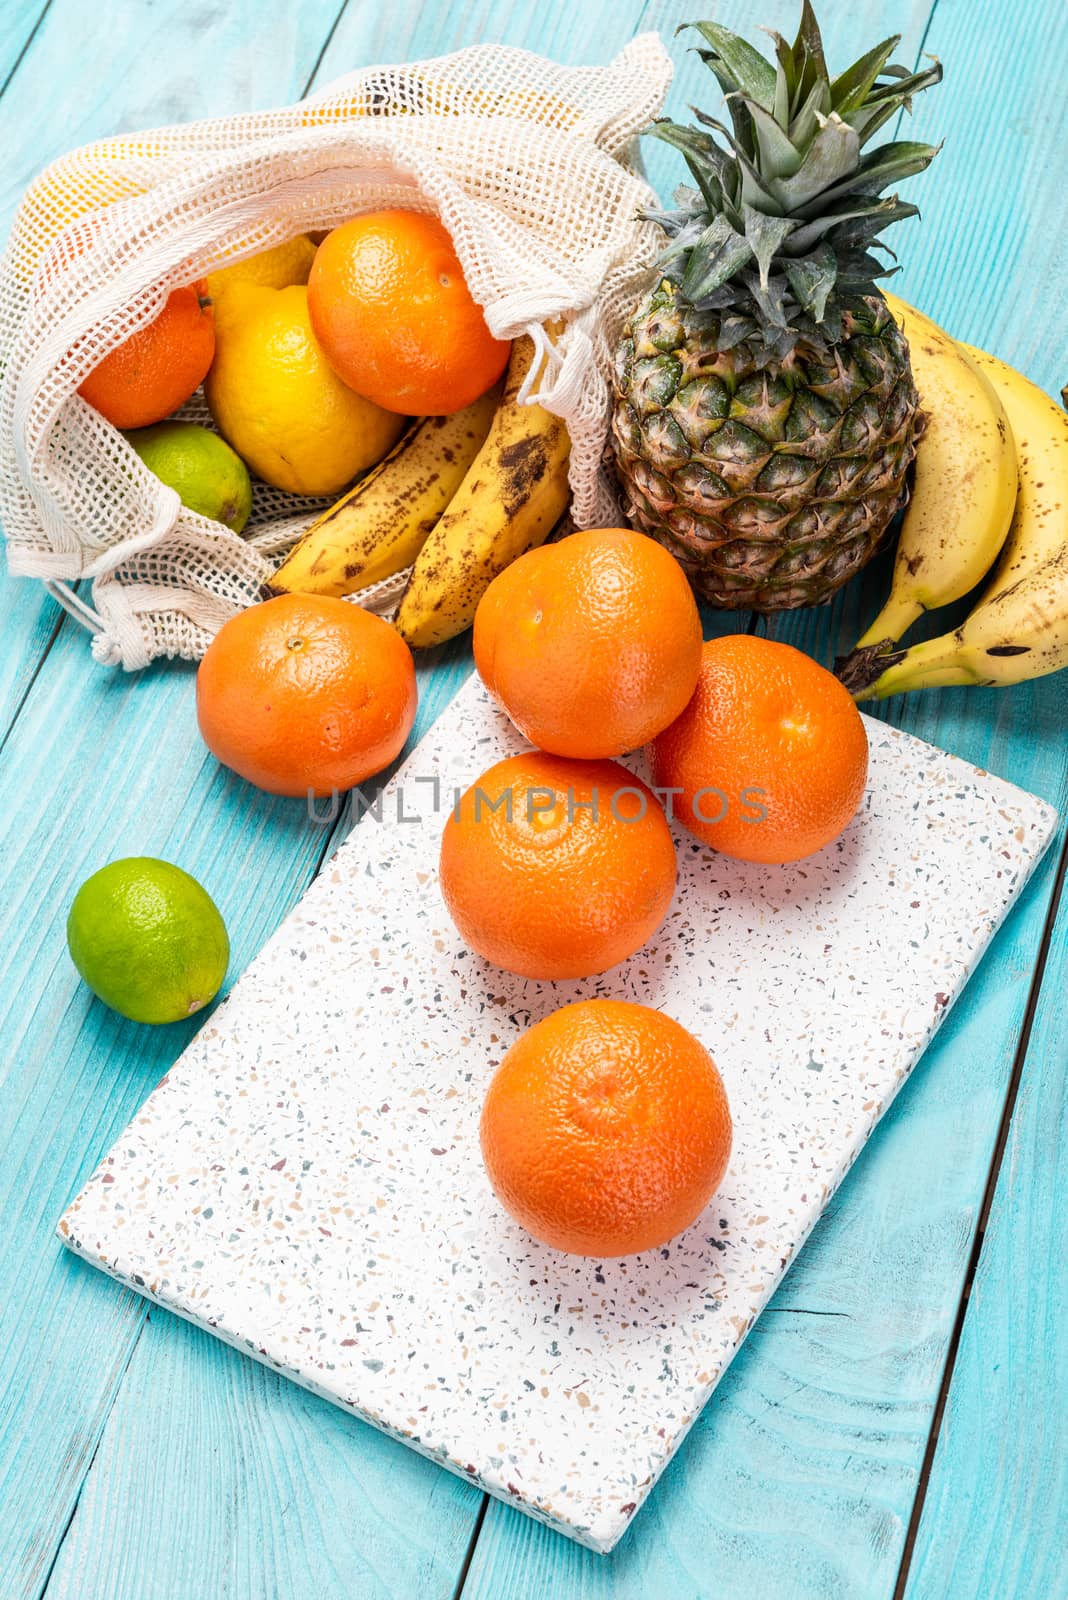 Fresh Orange and Tropical Fruits on Wooden Table. Vibrant Colors Healthy Eating.